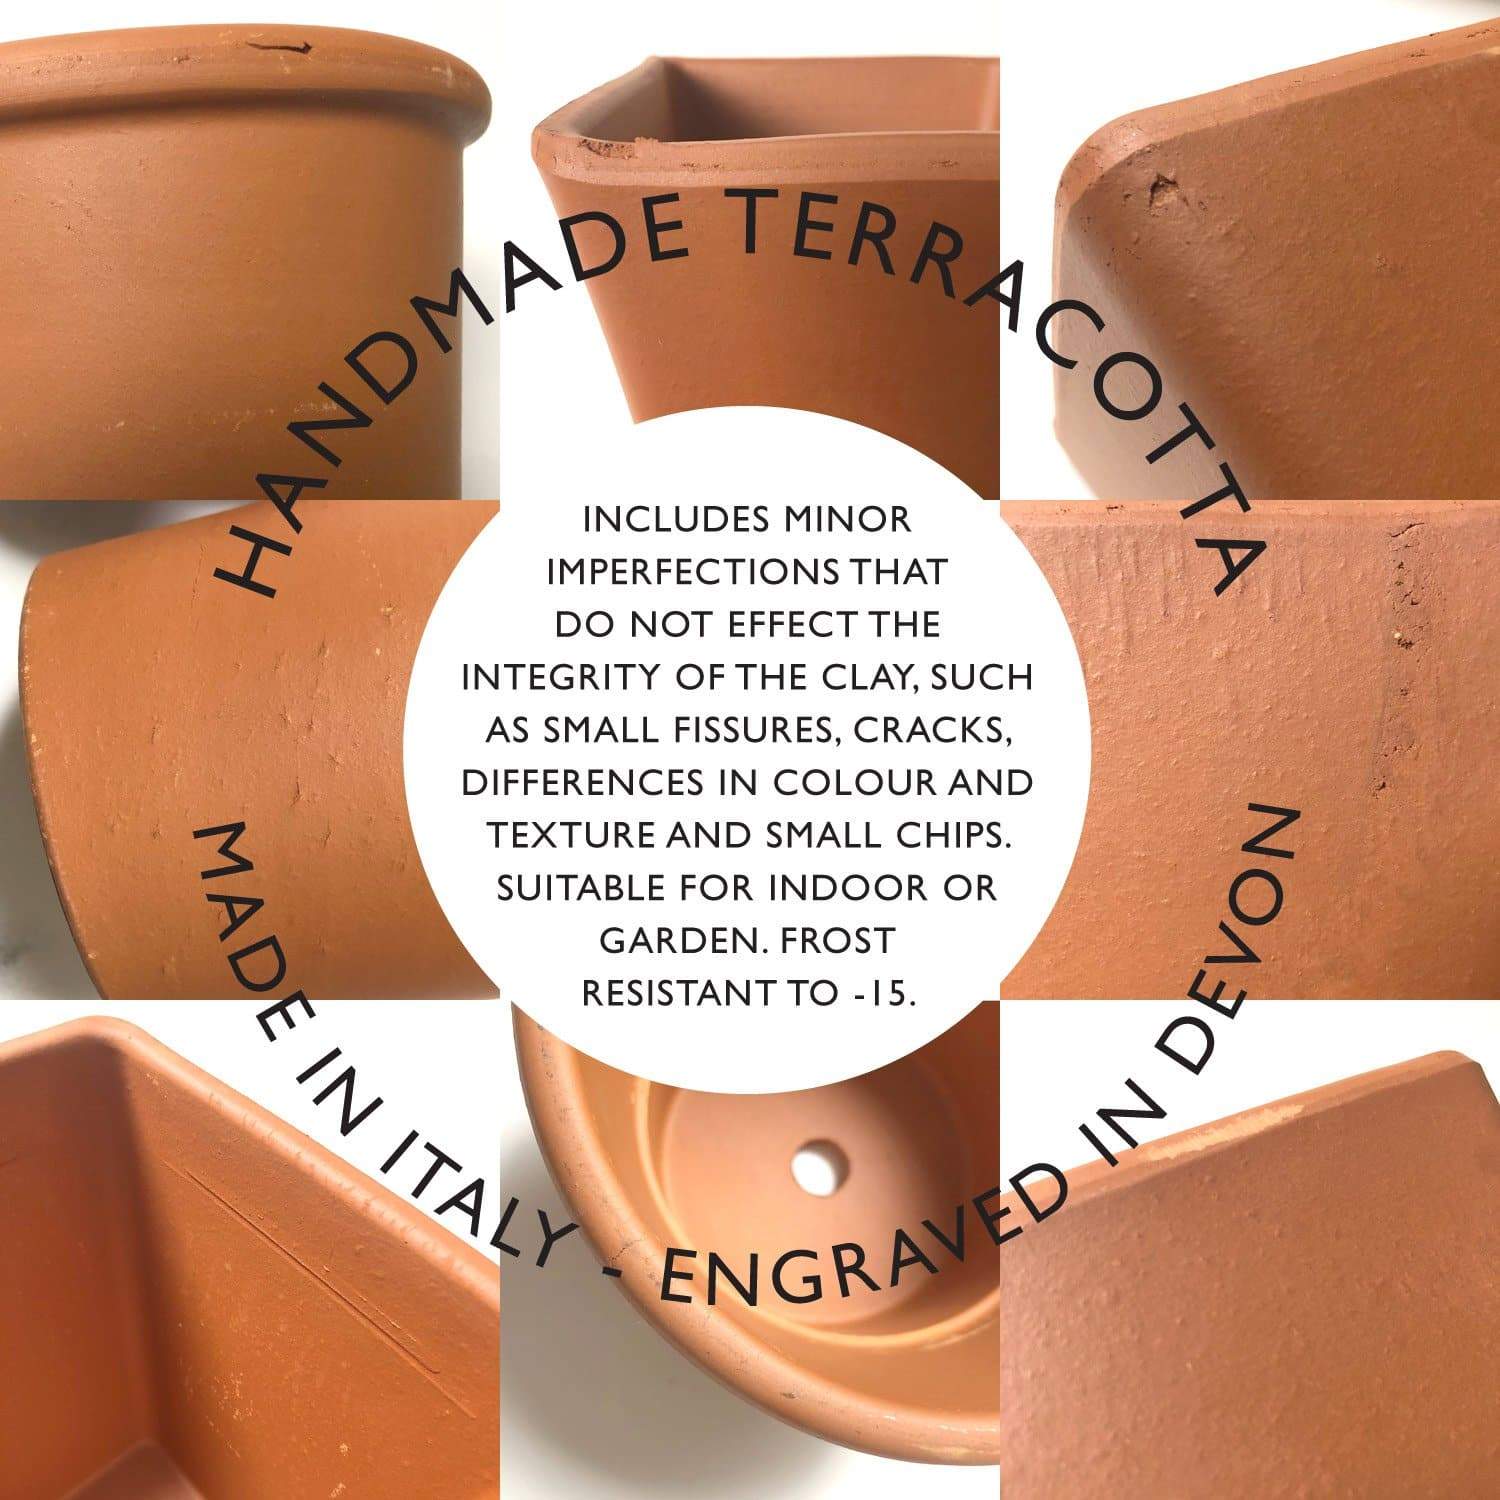 letterfest terracotta Personalised Forget Me Not Plant Pot